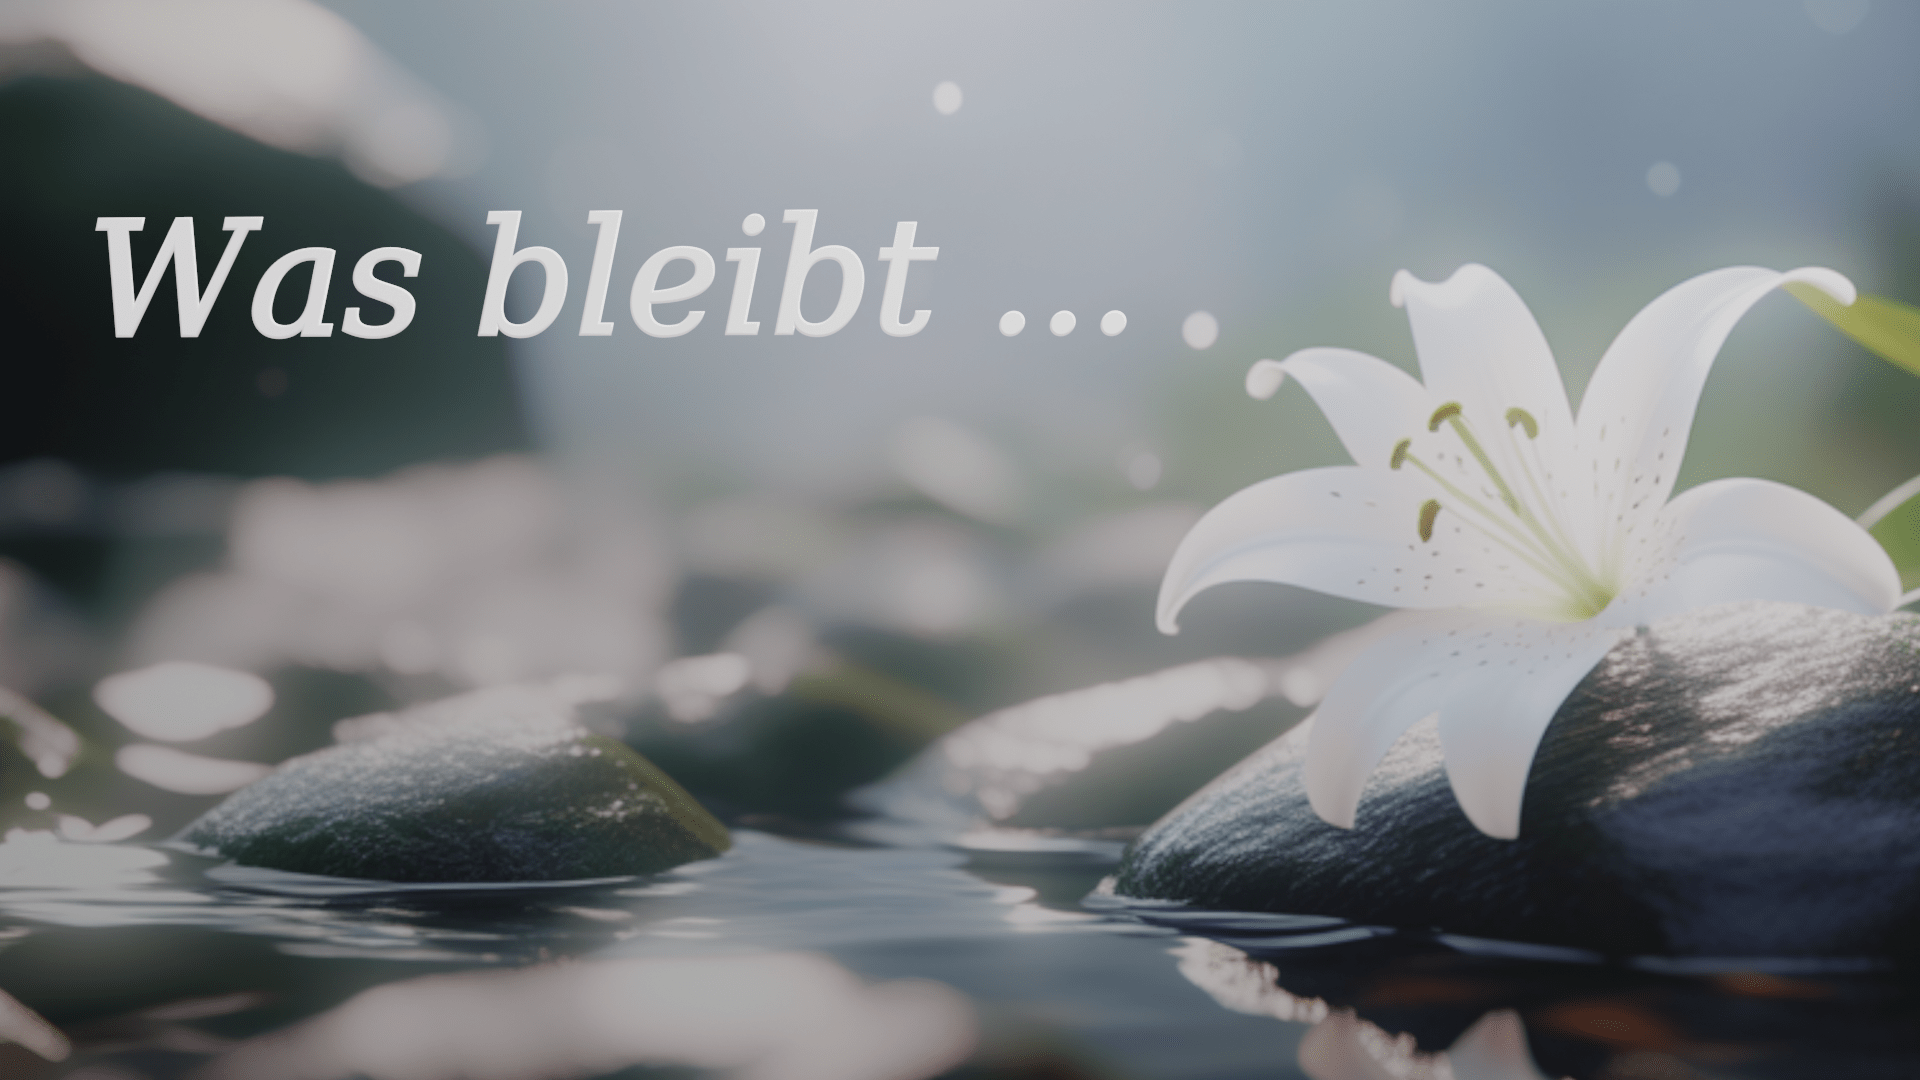 You are currently viewing Was bleibt…